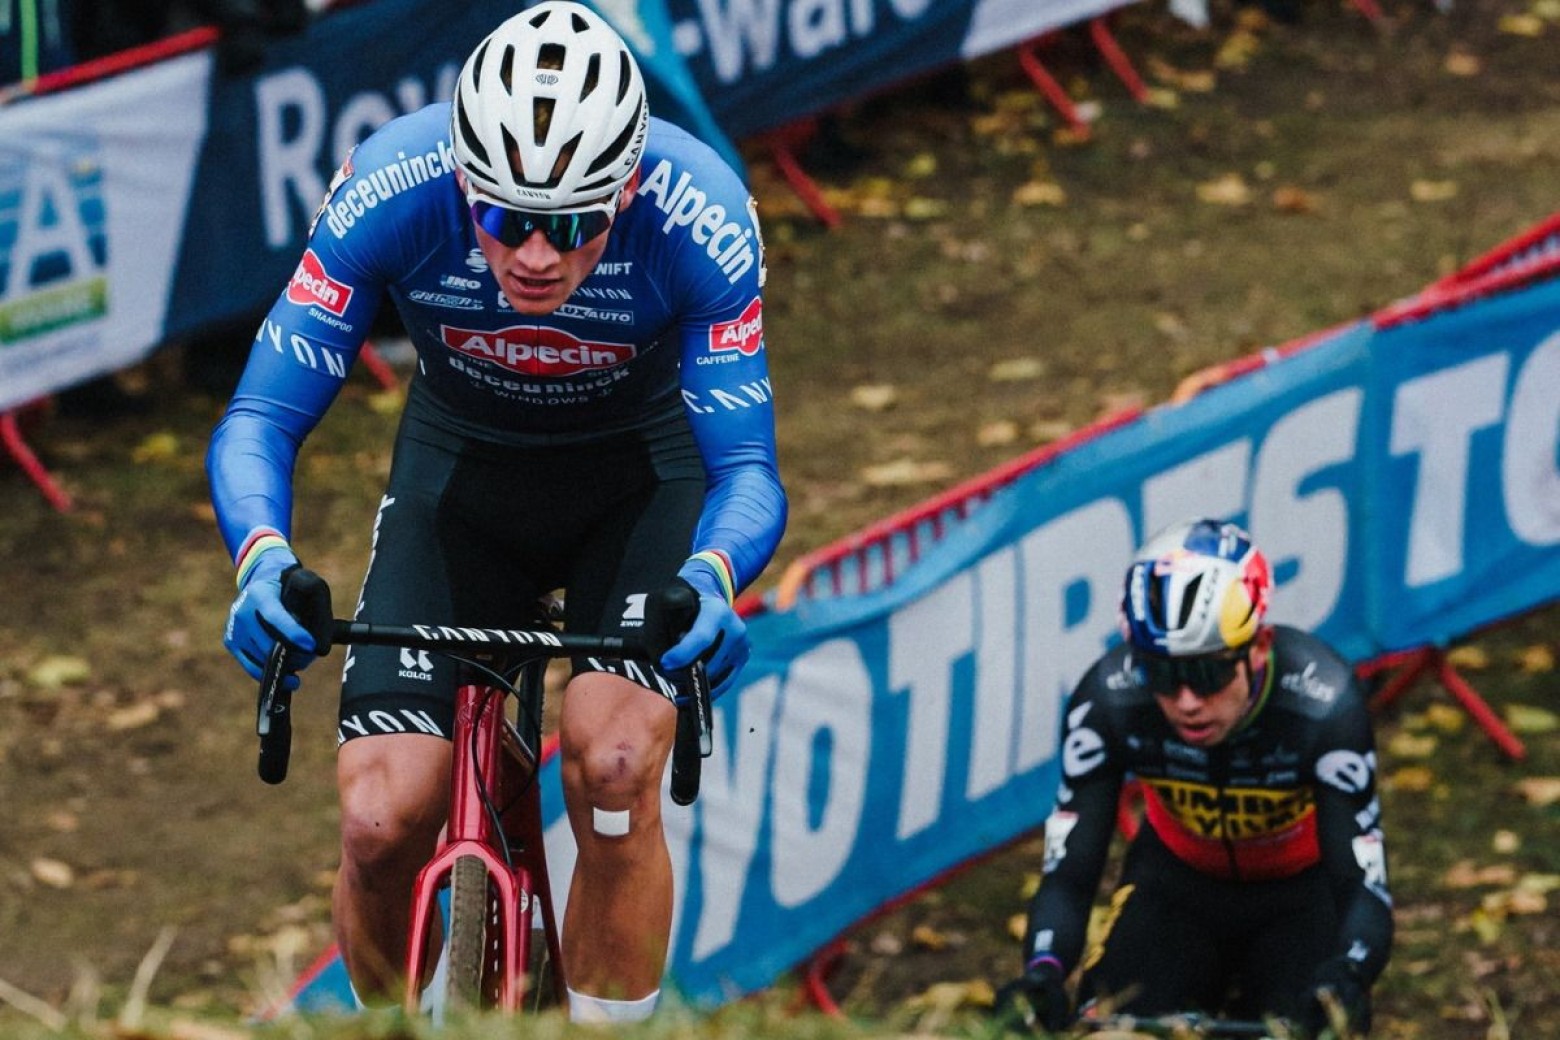 How much money can you get for winning the Cyclocross World Cup?